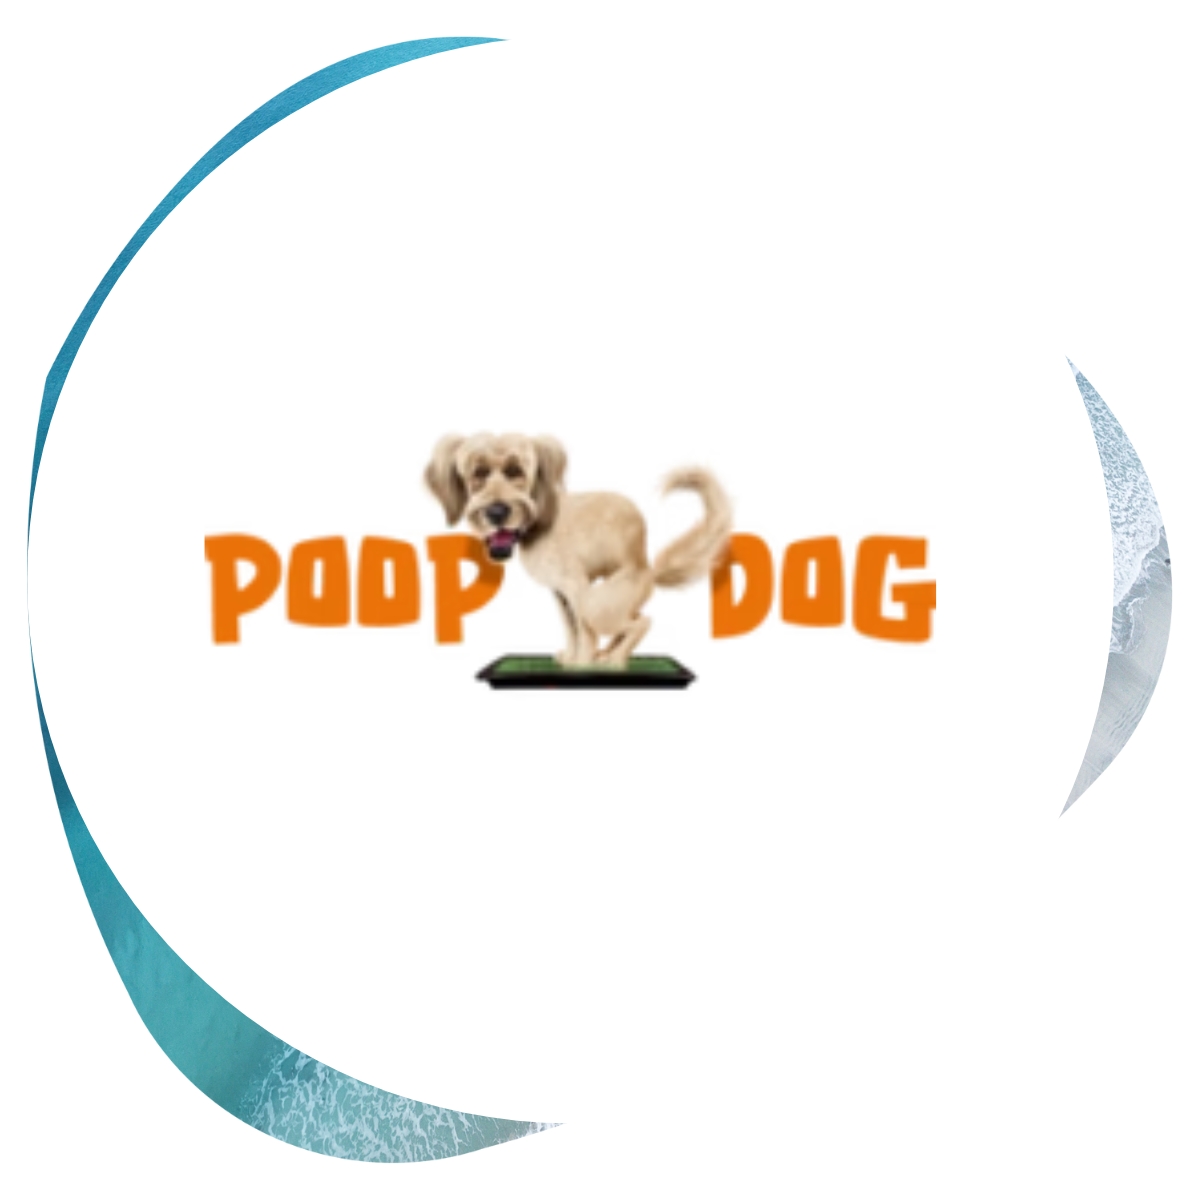 Poop Dog featured